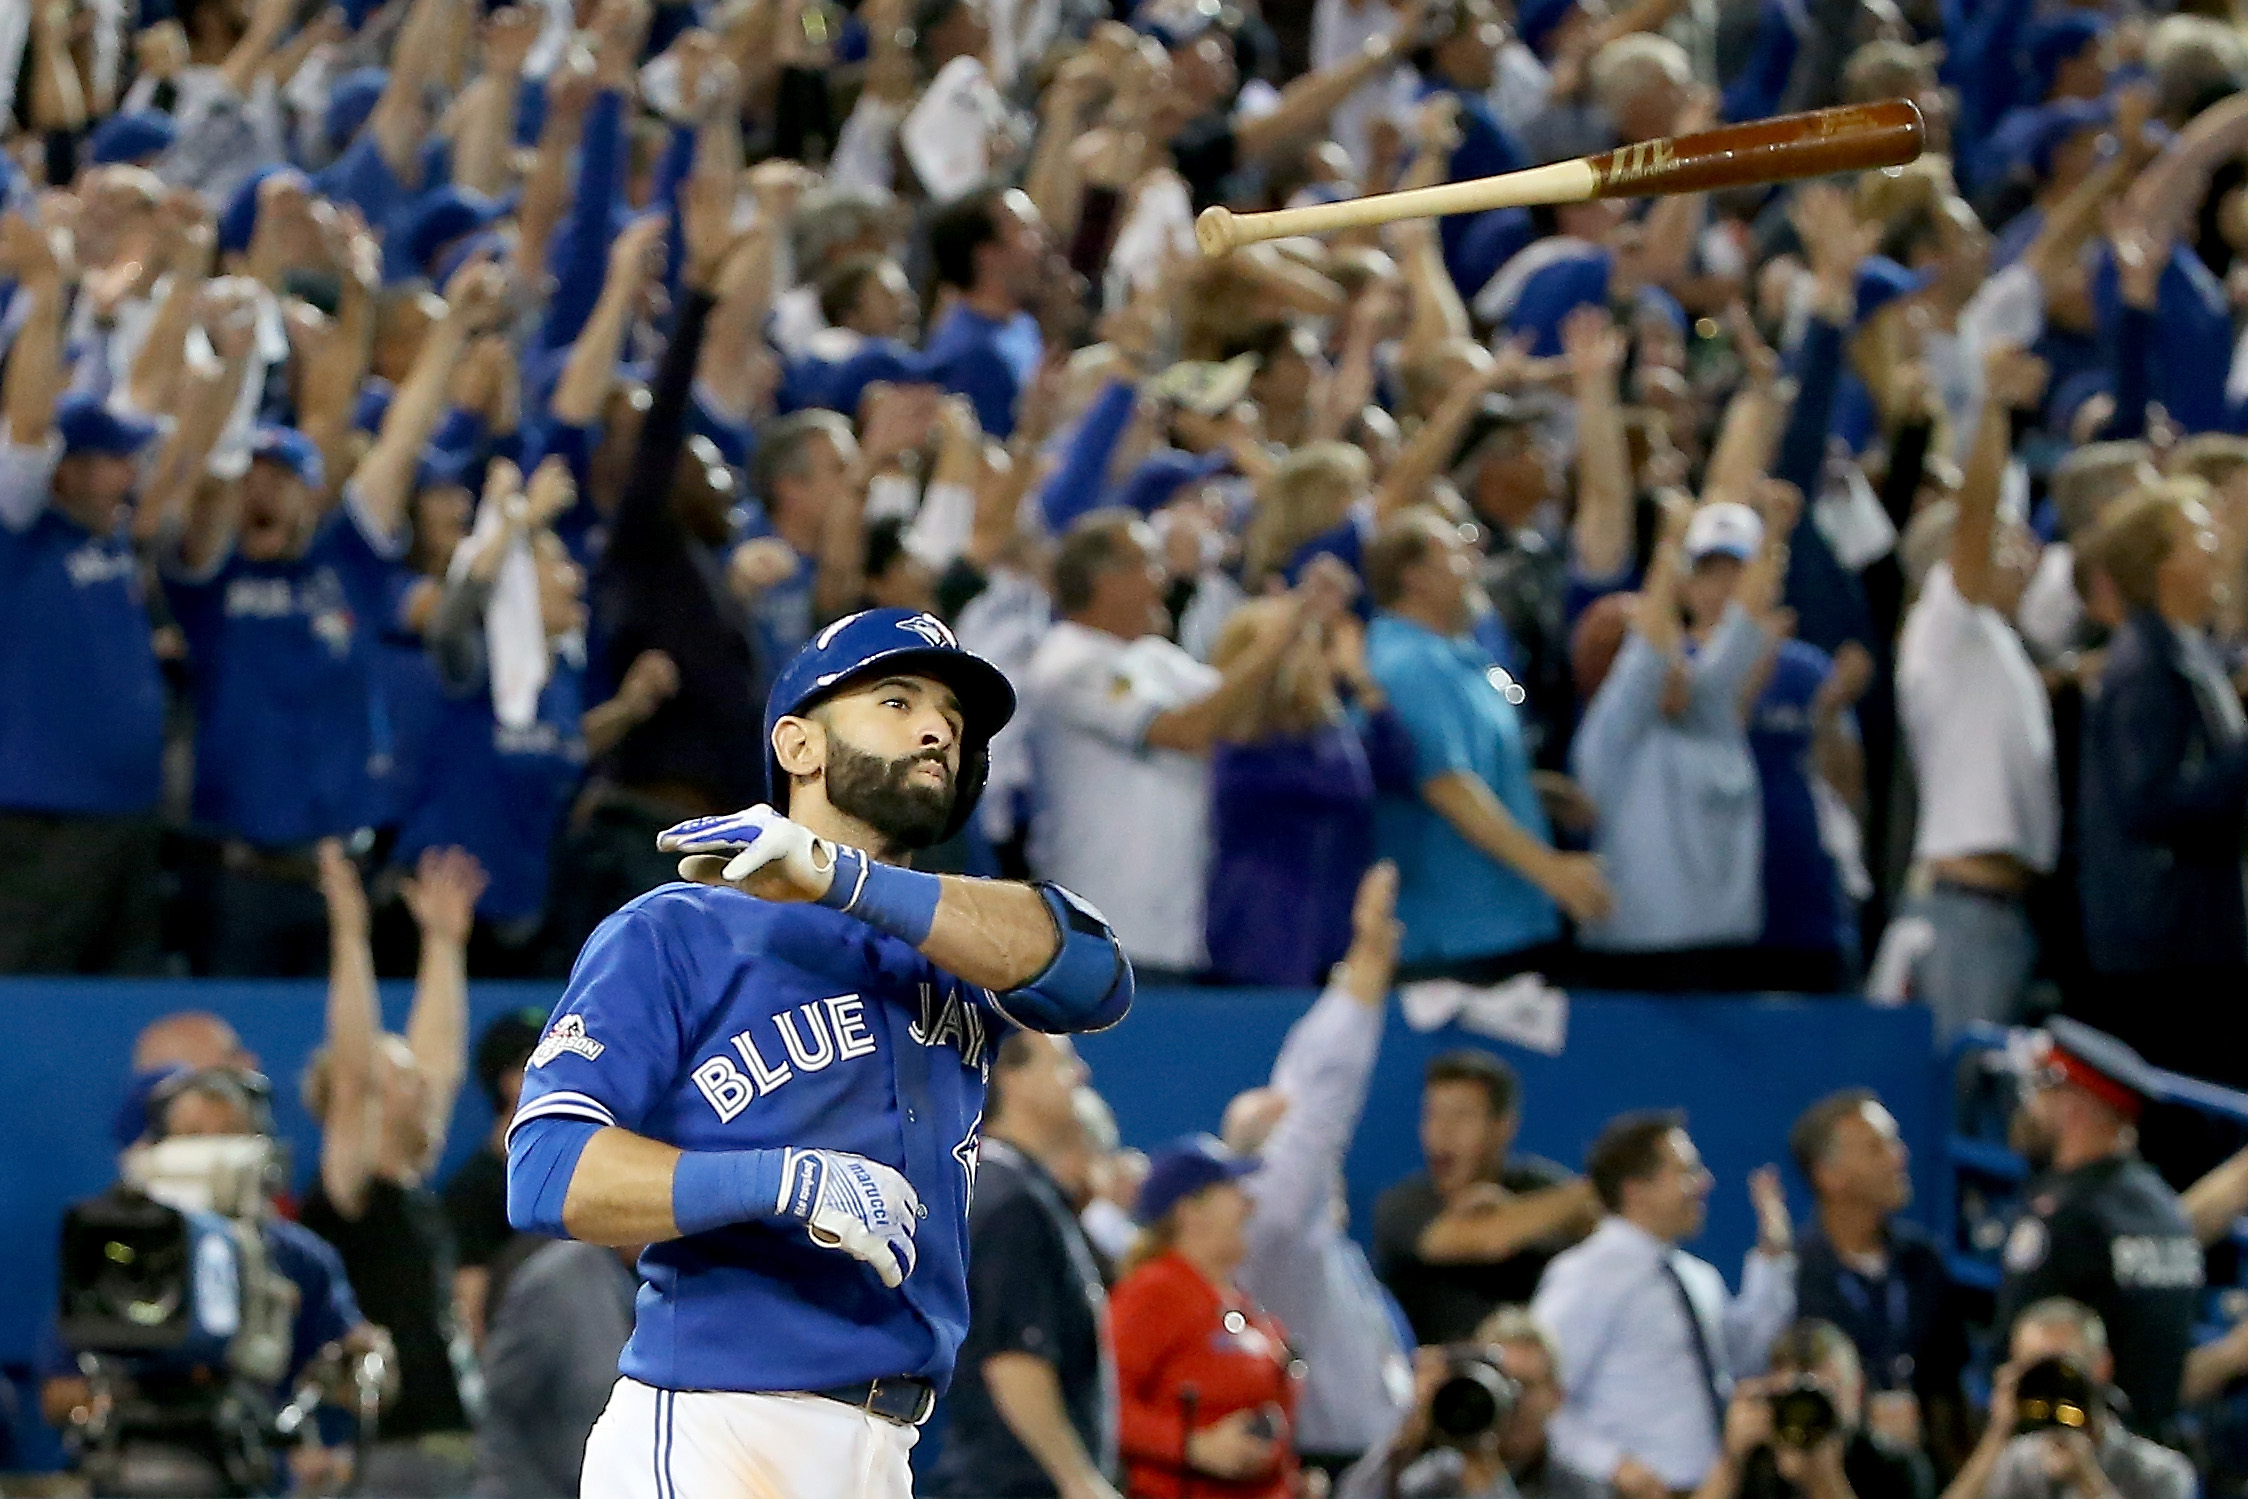 Jose Bautista #19 of the Toronto Blue Jays throws his bat up in the air after he hits a three-run home run in the seventh inning against the Texas Rangers in game five of the American League Division Series at Rogers Centre on October 14, 2015 in Toronto, Canada. (Tom Szczerbowski—Getty Images)